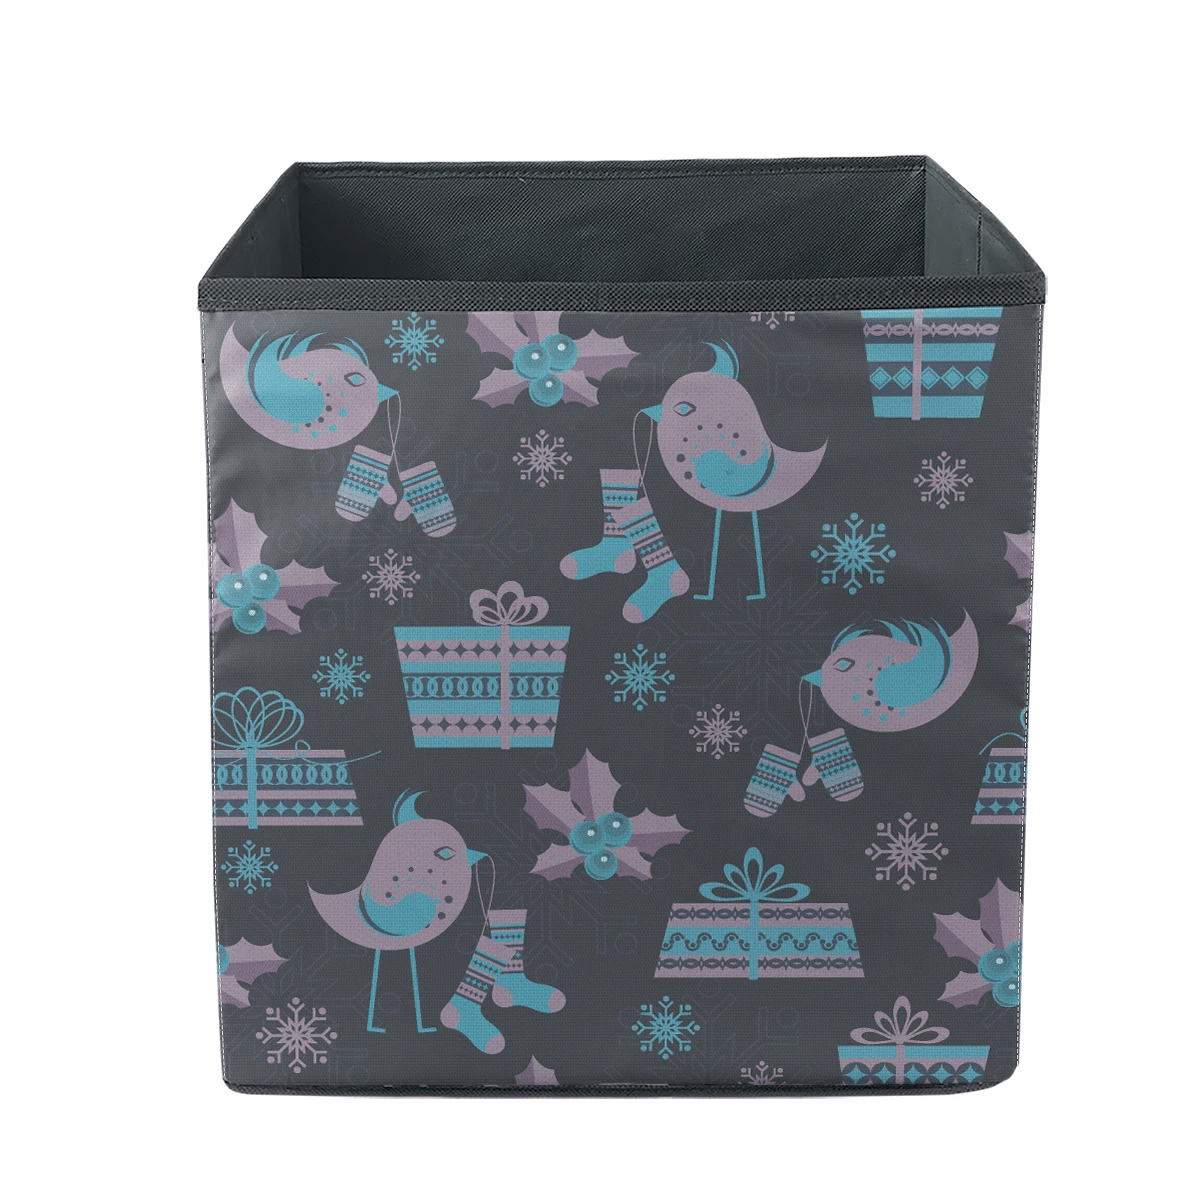 Nice Christmas With Birds And Gifts Storage Bin Storage Cube